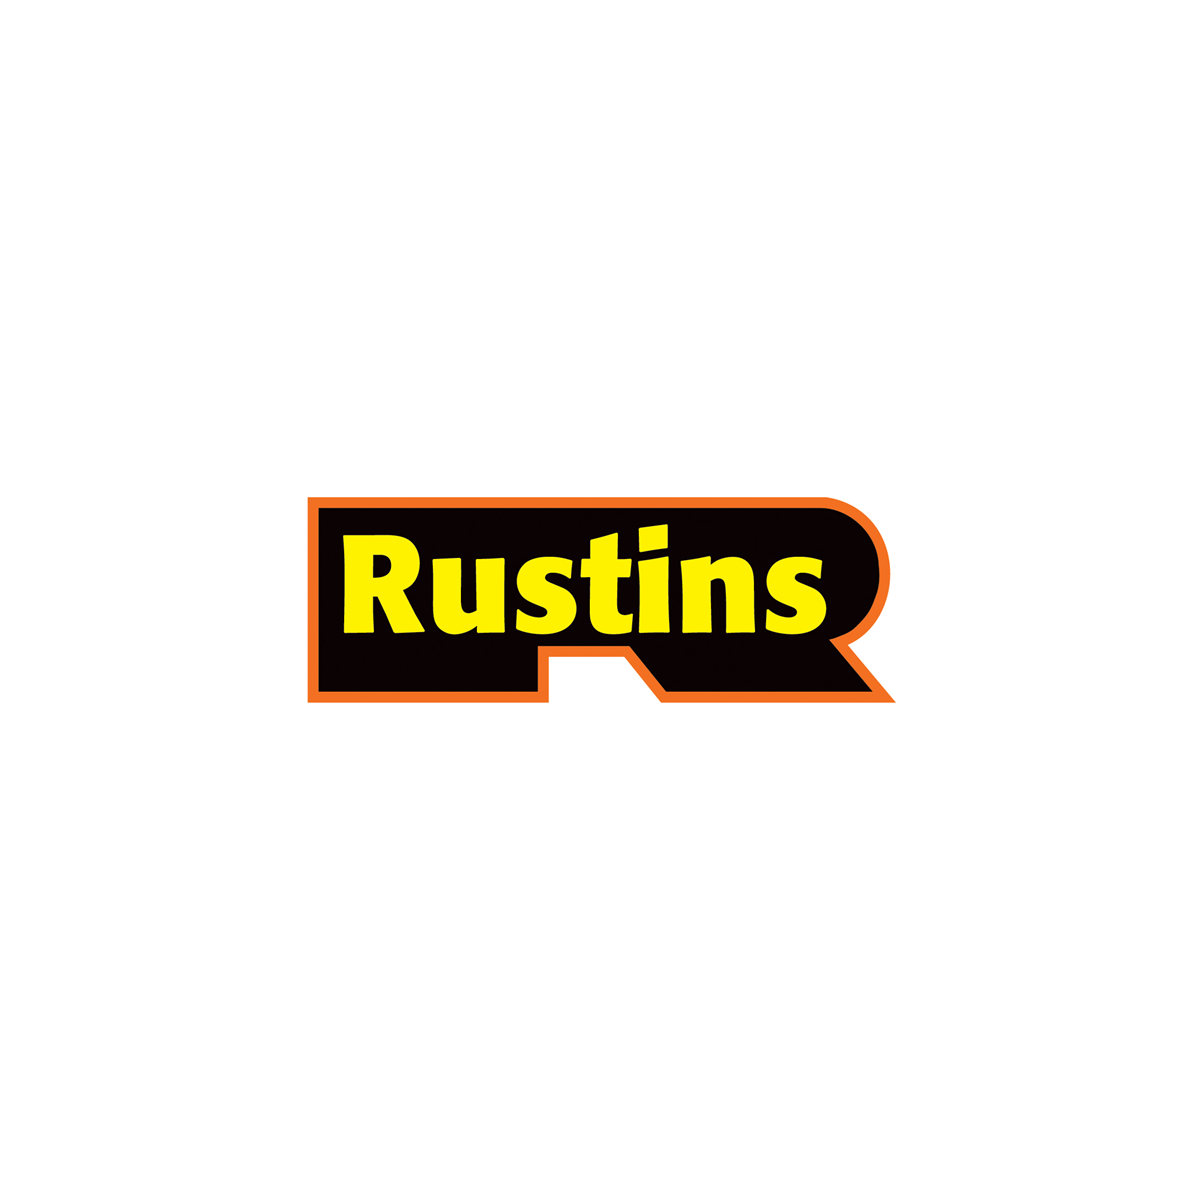 Where to buy Rustins Wood Oils